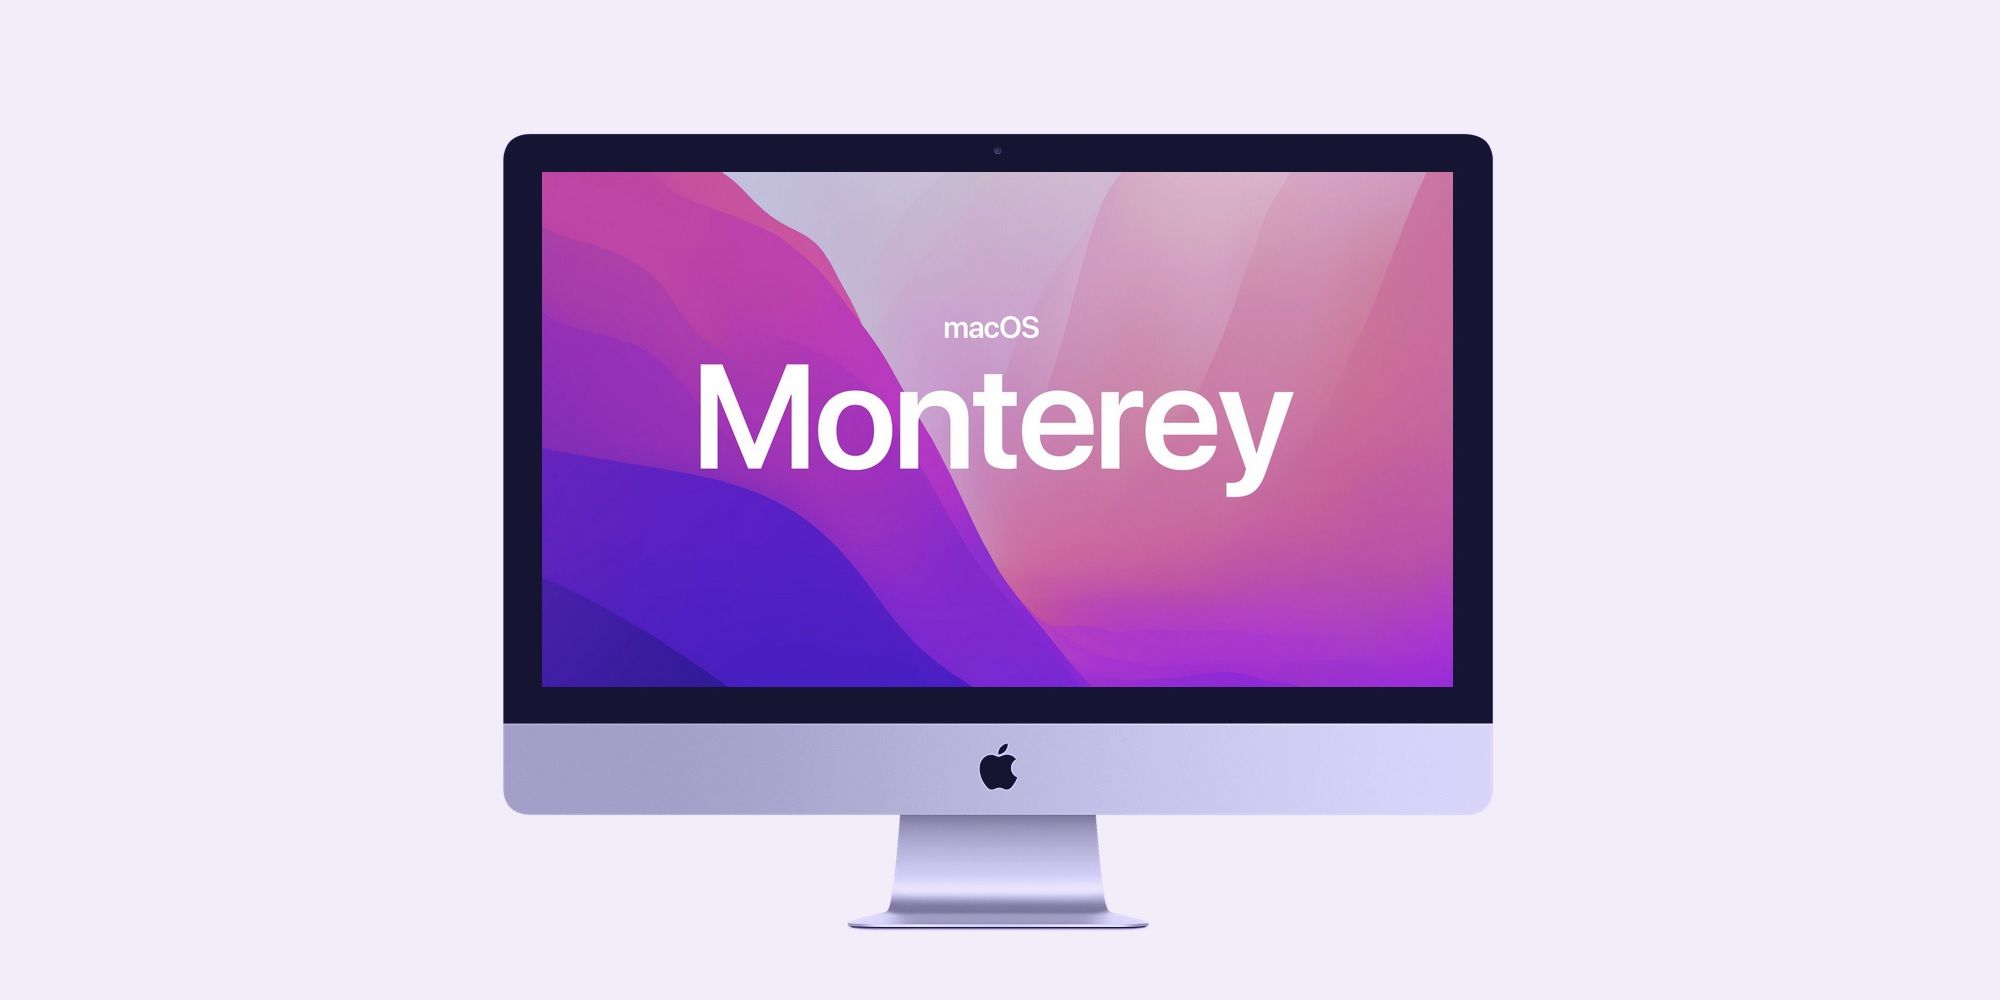 macOS Monterey Is Bricking Old Macs For Some Users